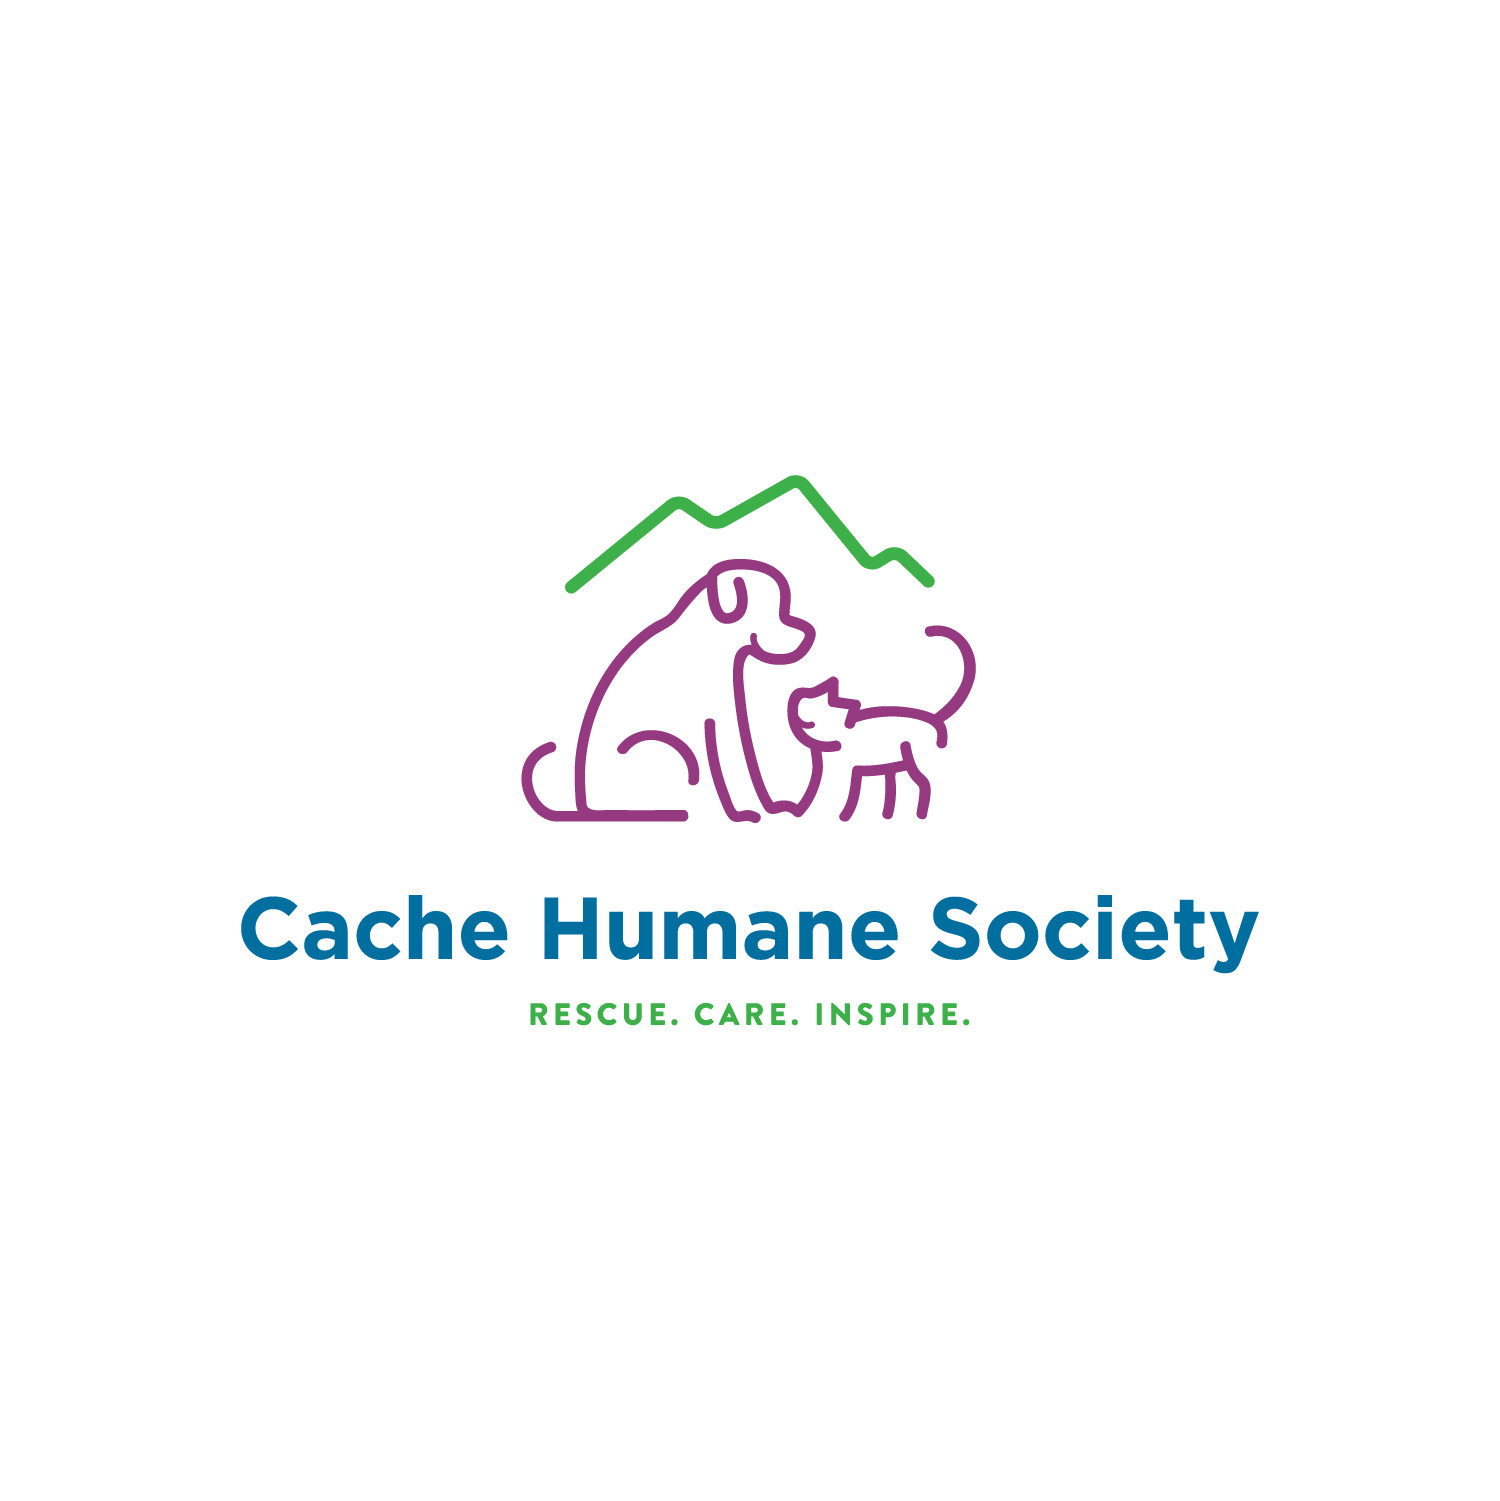 Cache humane society center for medicare and medicaid services powerpoint